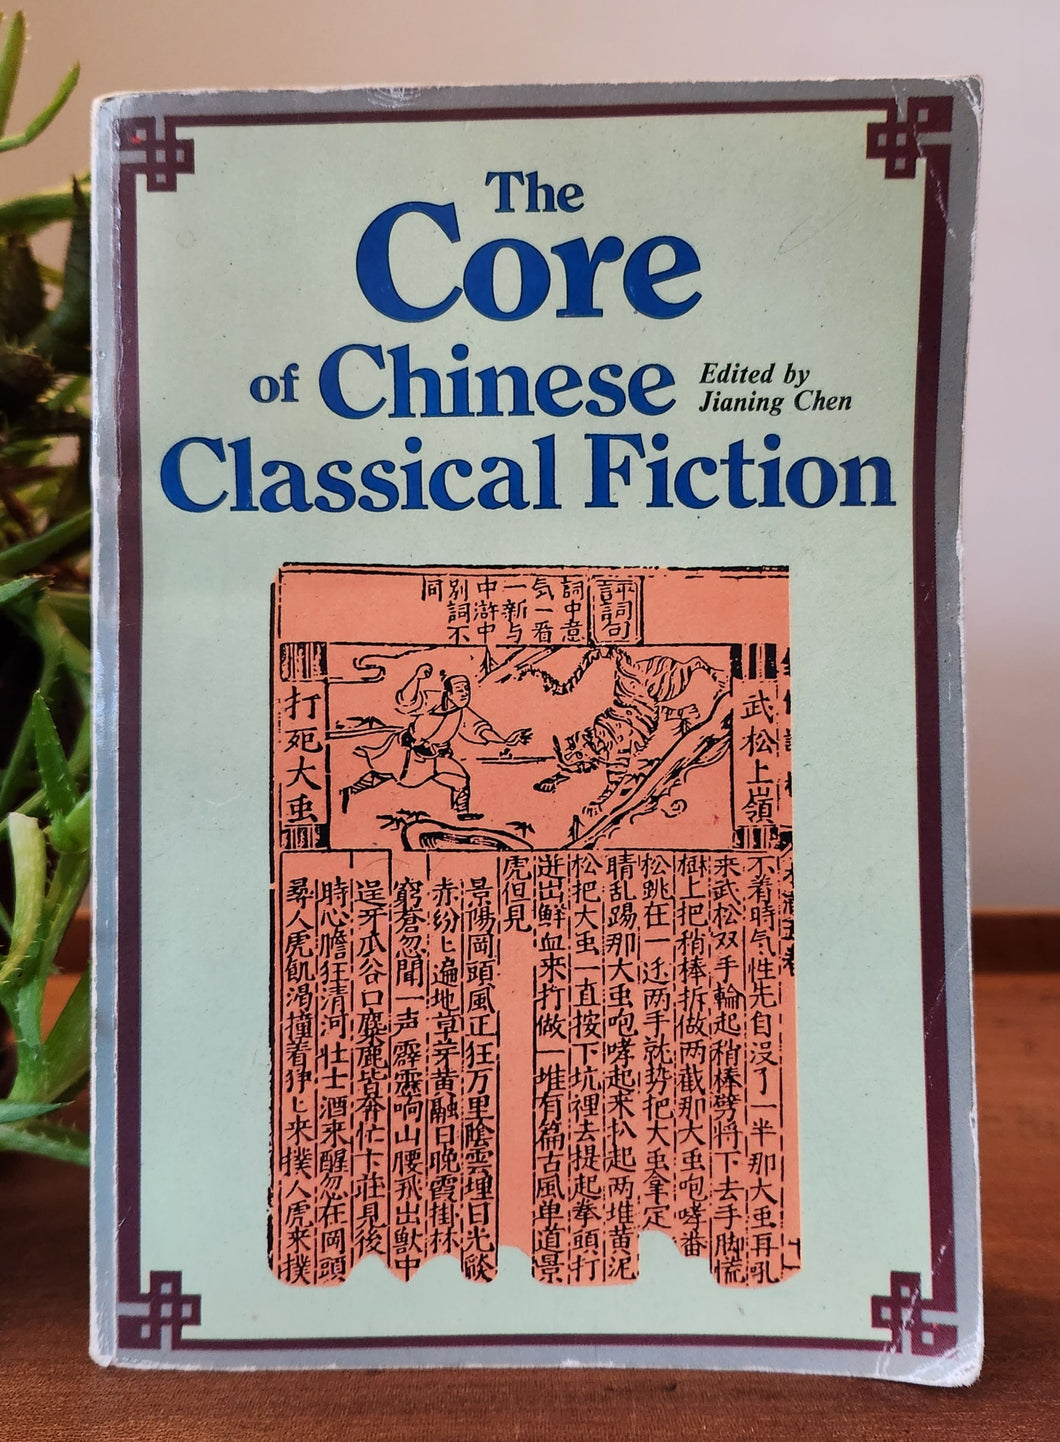 The Core of Chinese Classical Fiction Edited by Jianing Chen